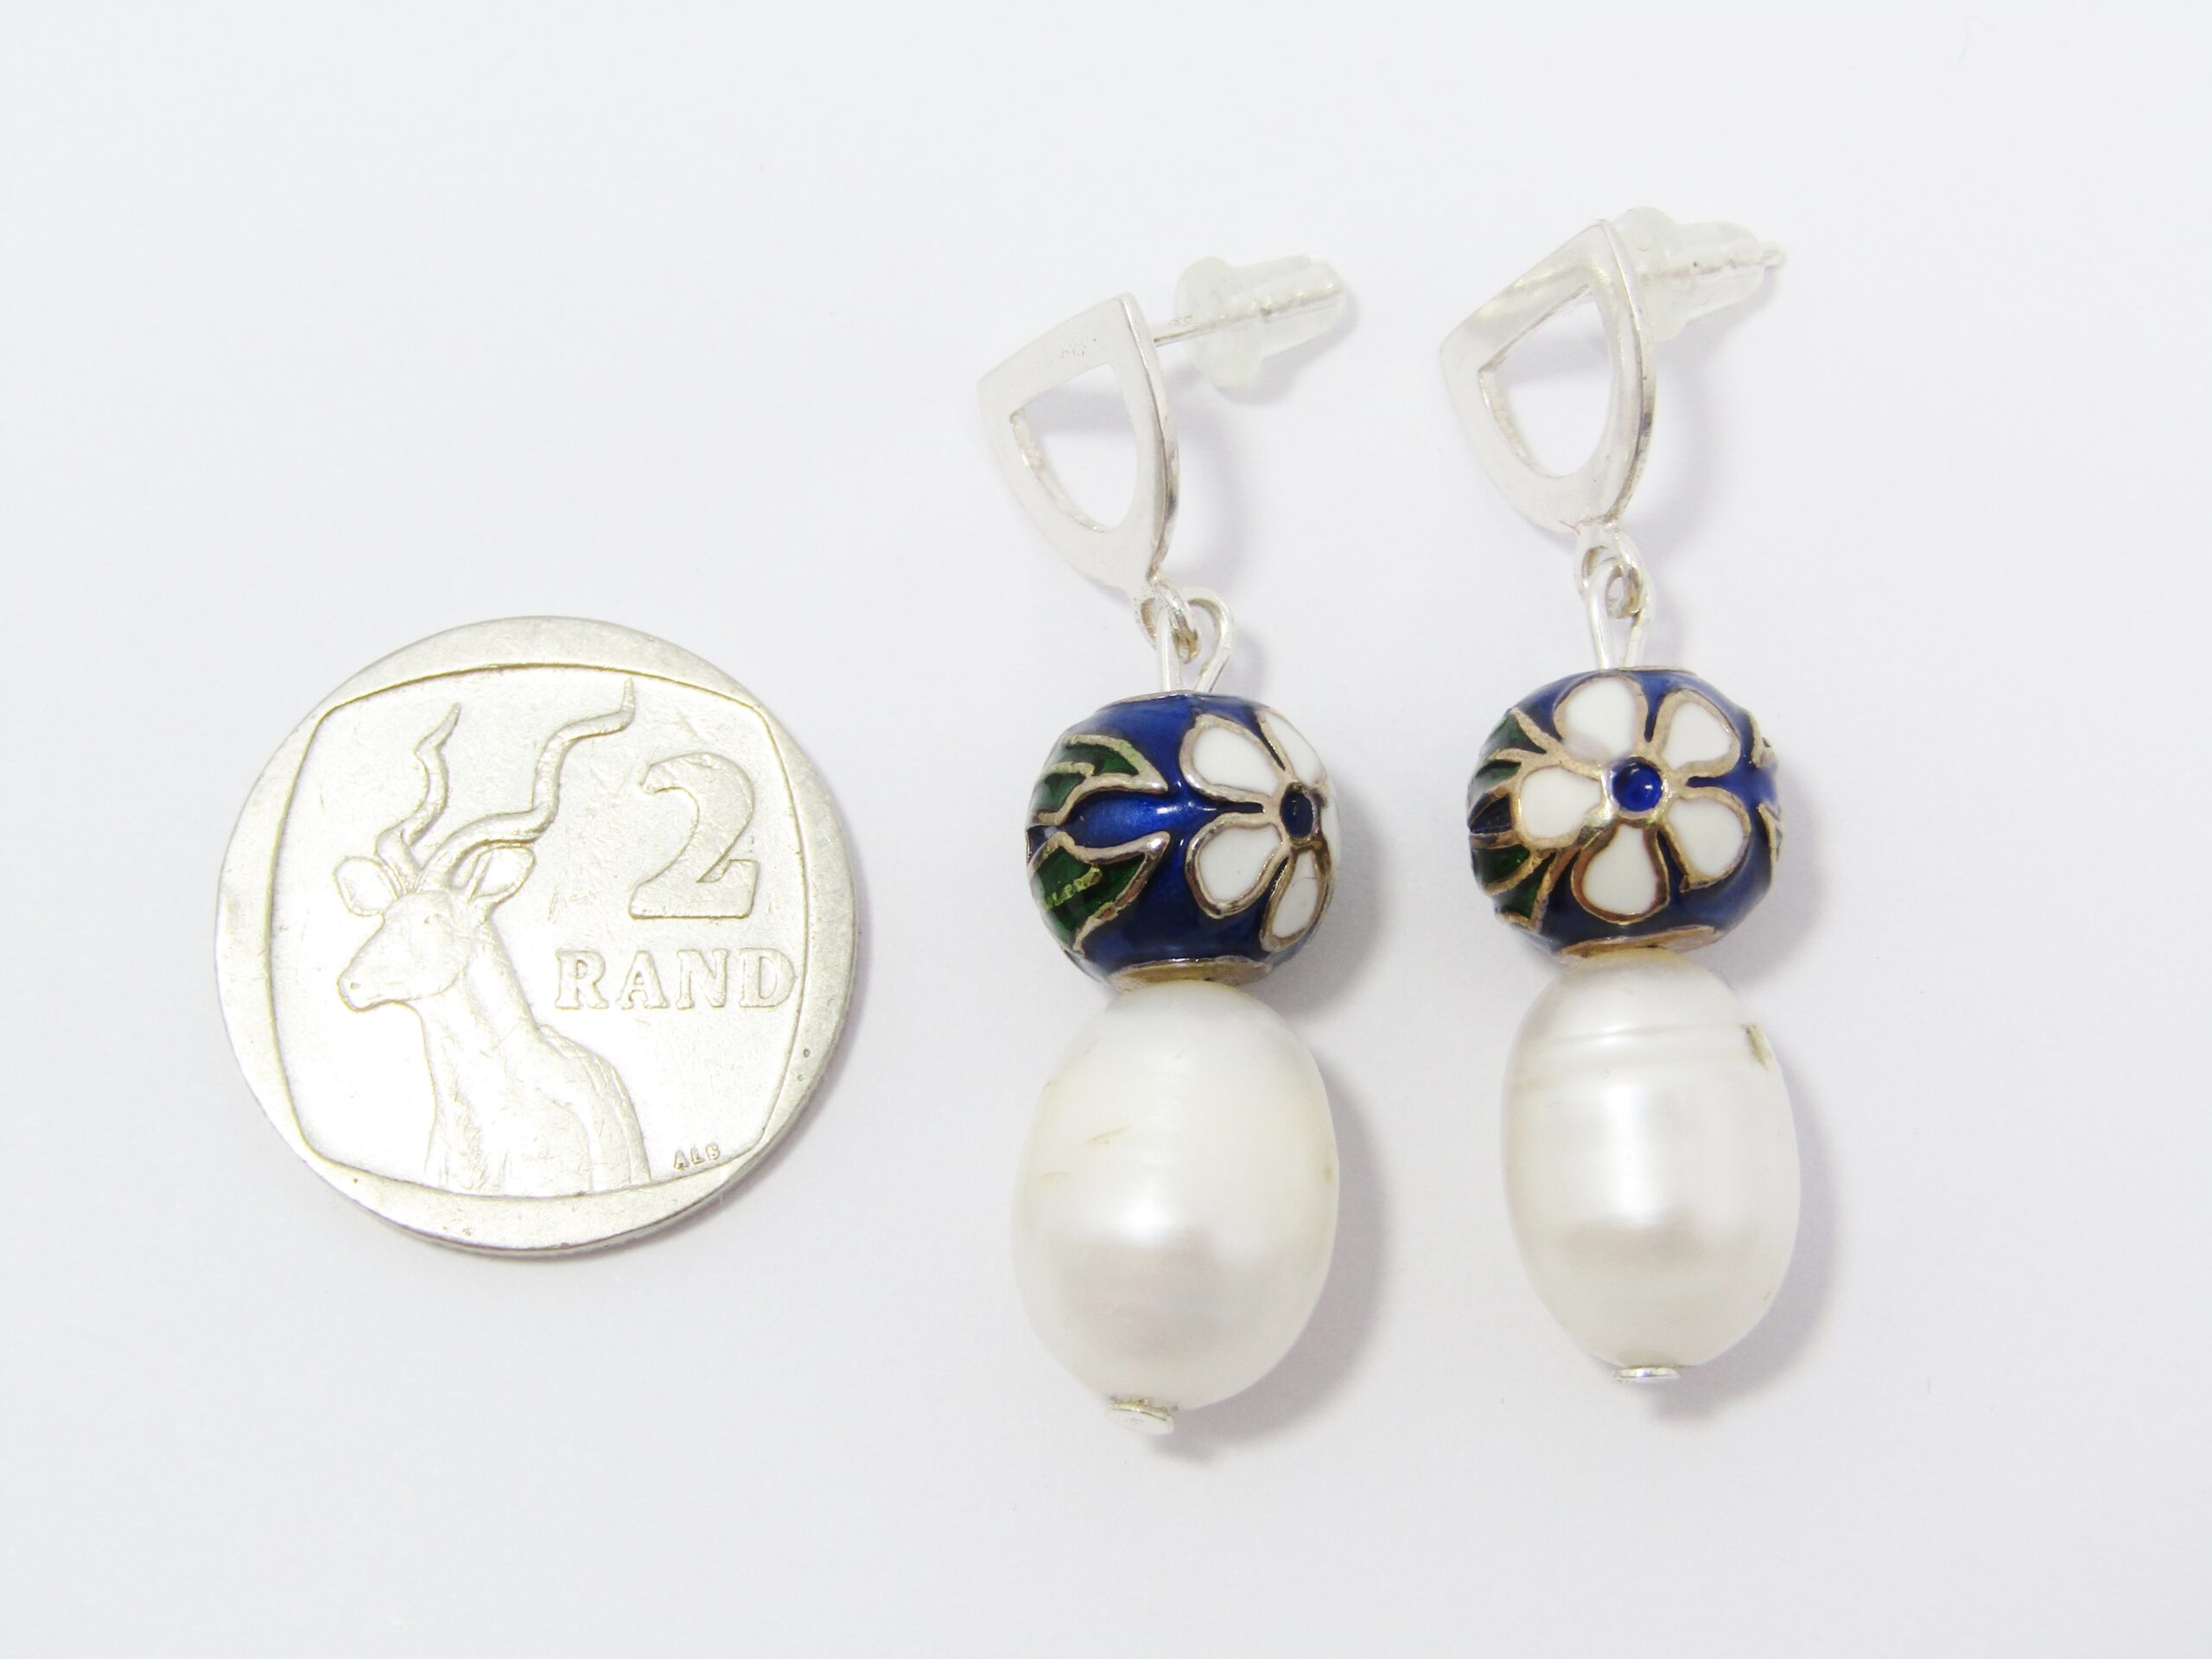 A Gorgeous Pair of Large Fresh Water pearls and Cloisonné Ball Earrings in Sterling Silver.